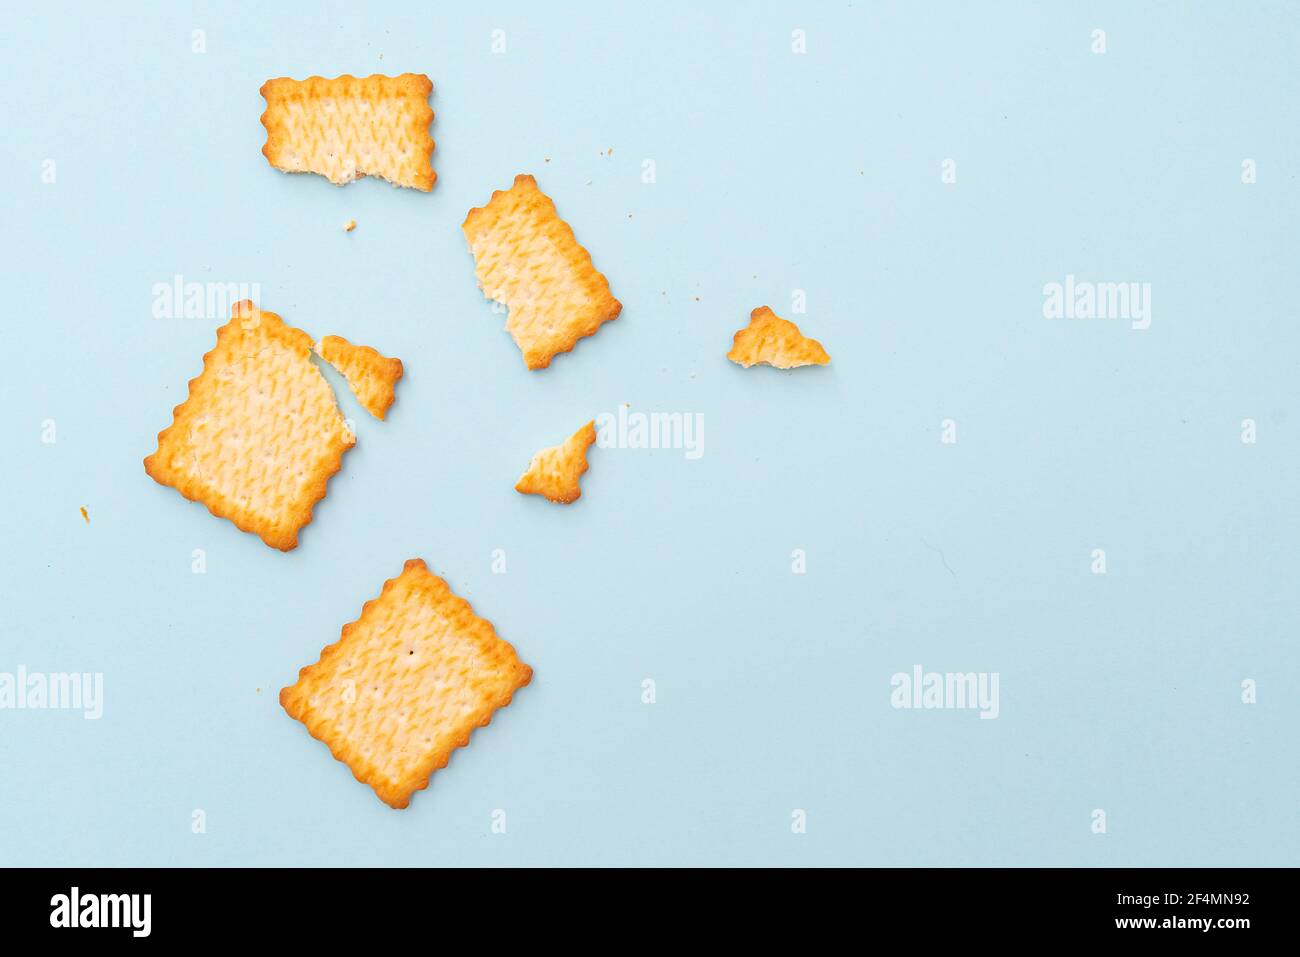 Broken dry cookies on blue background, top view, lay out Stock Photo